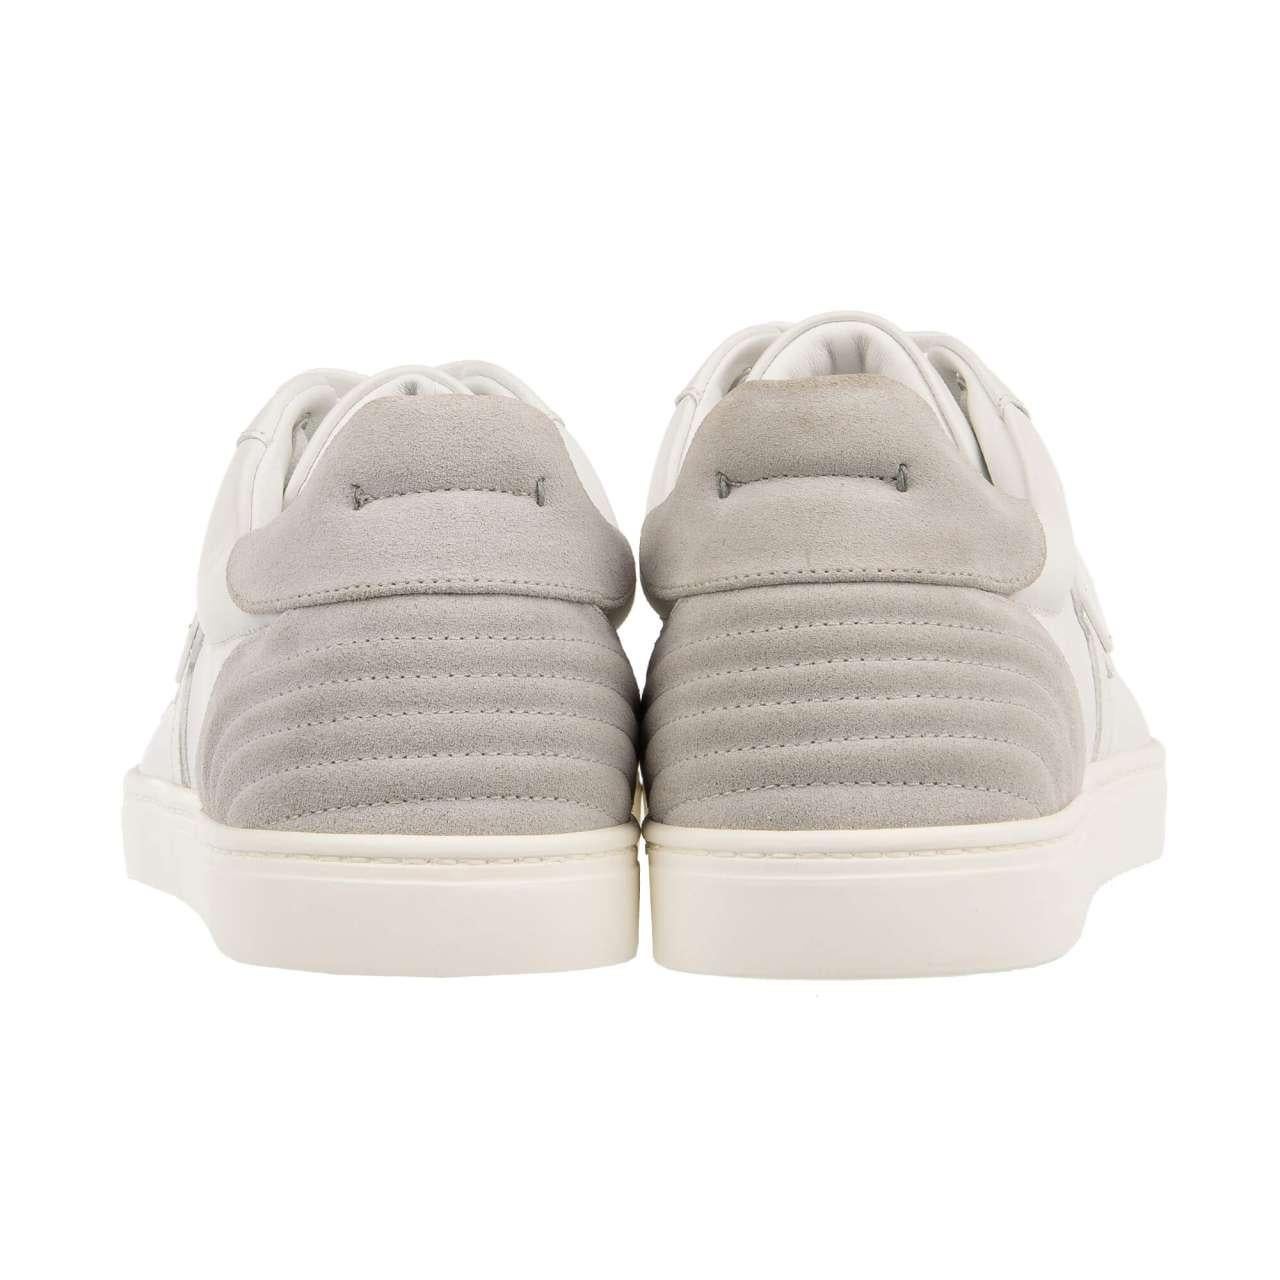 D&G Low-Top Sneaker LONDON with DG Logo Plate White Gray 41 UK 7 US 8 For Sale 1